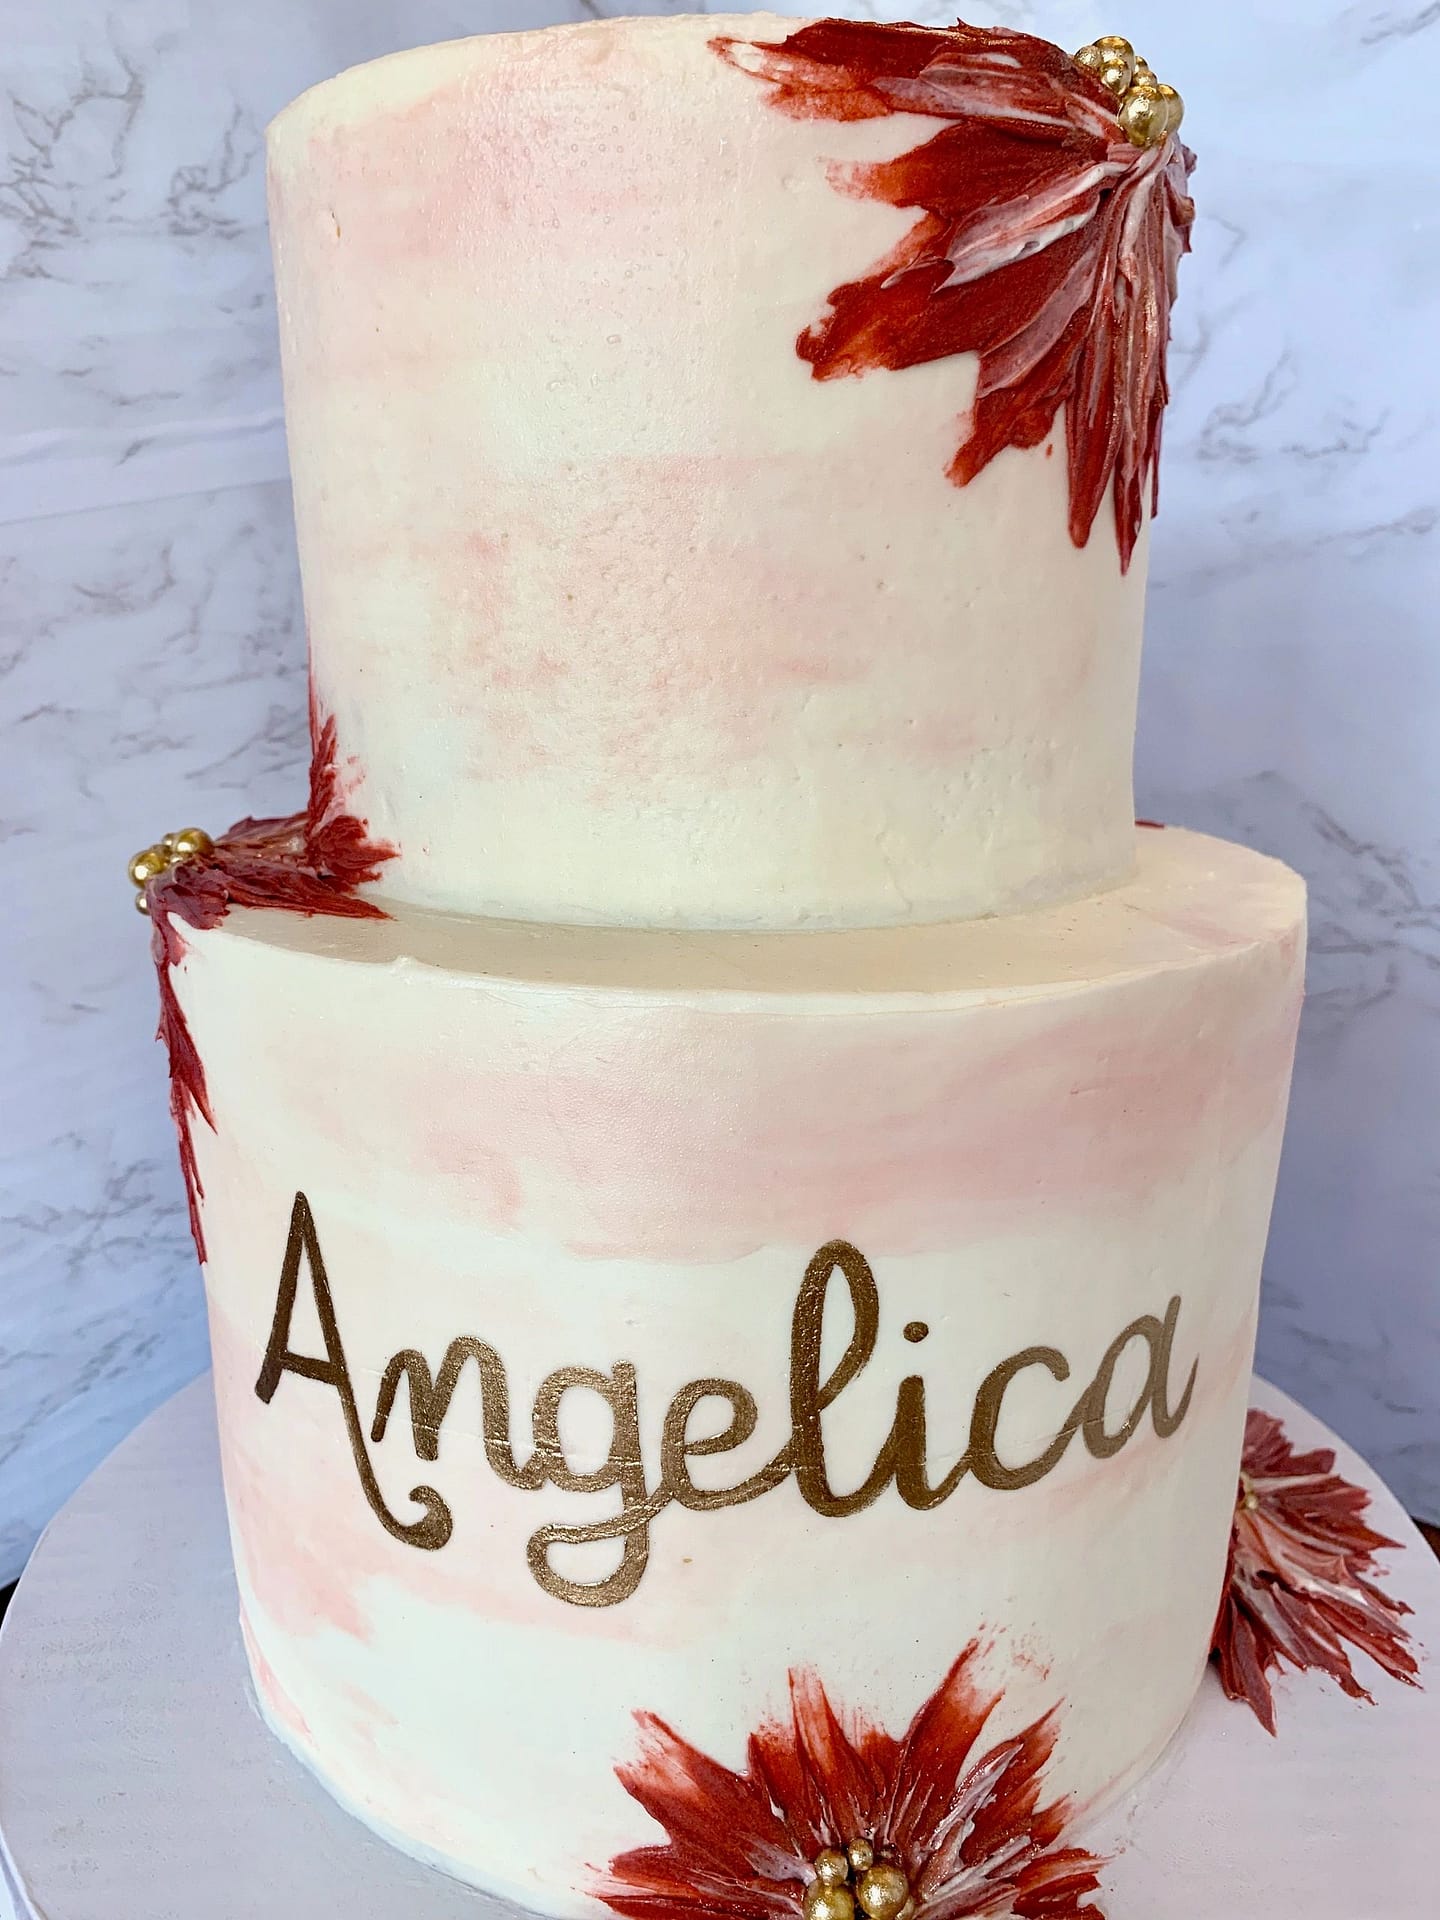 Handpainted buttercream floral two-tier cake maroon and blush.